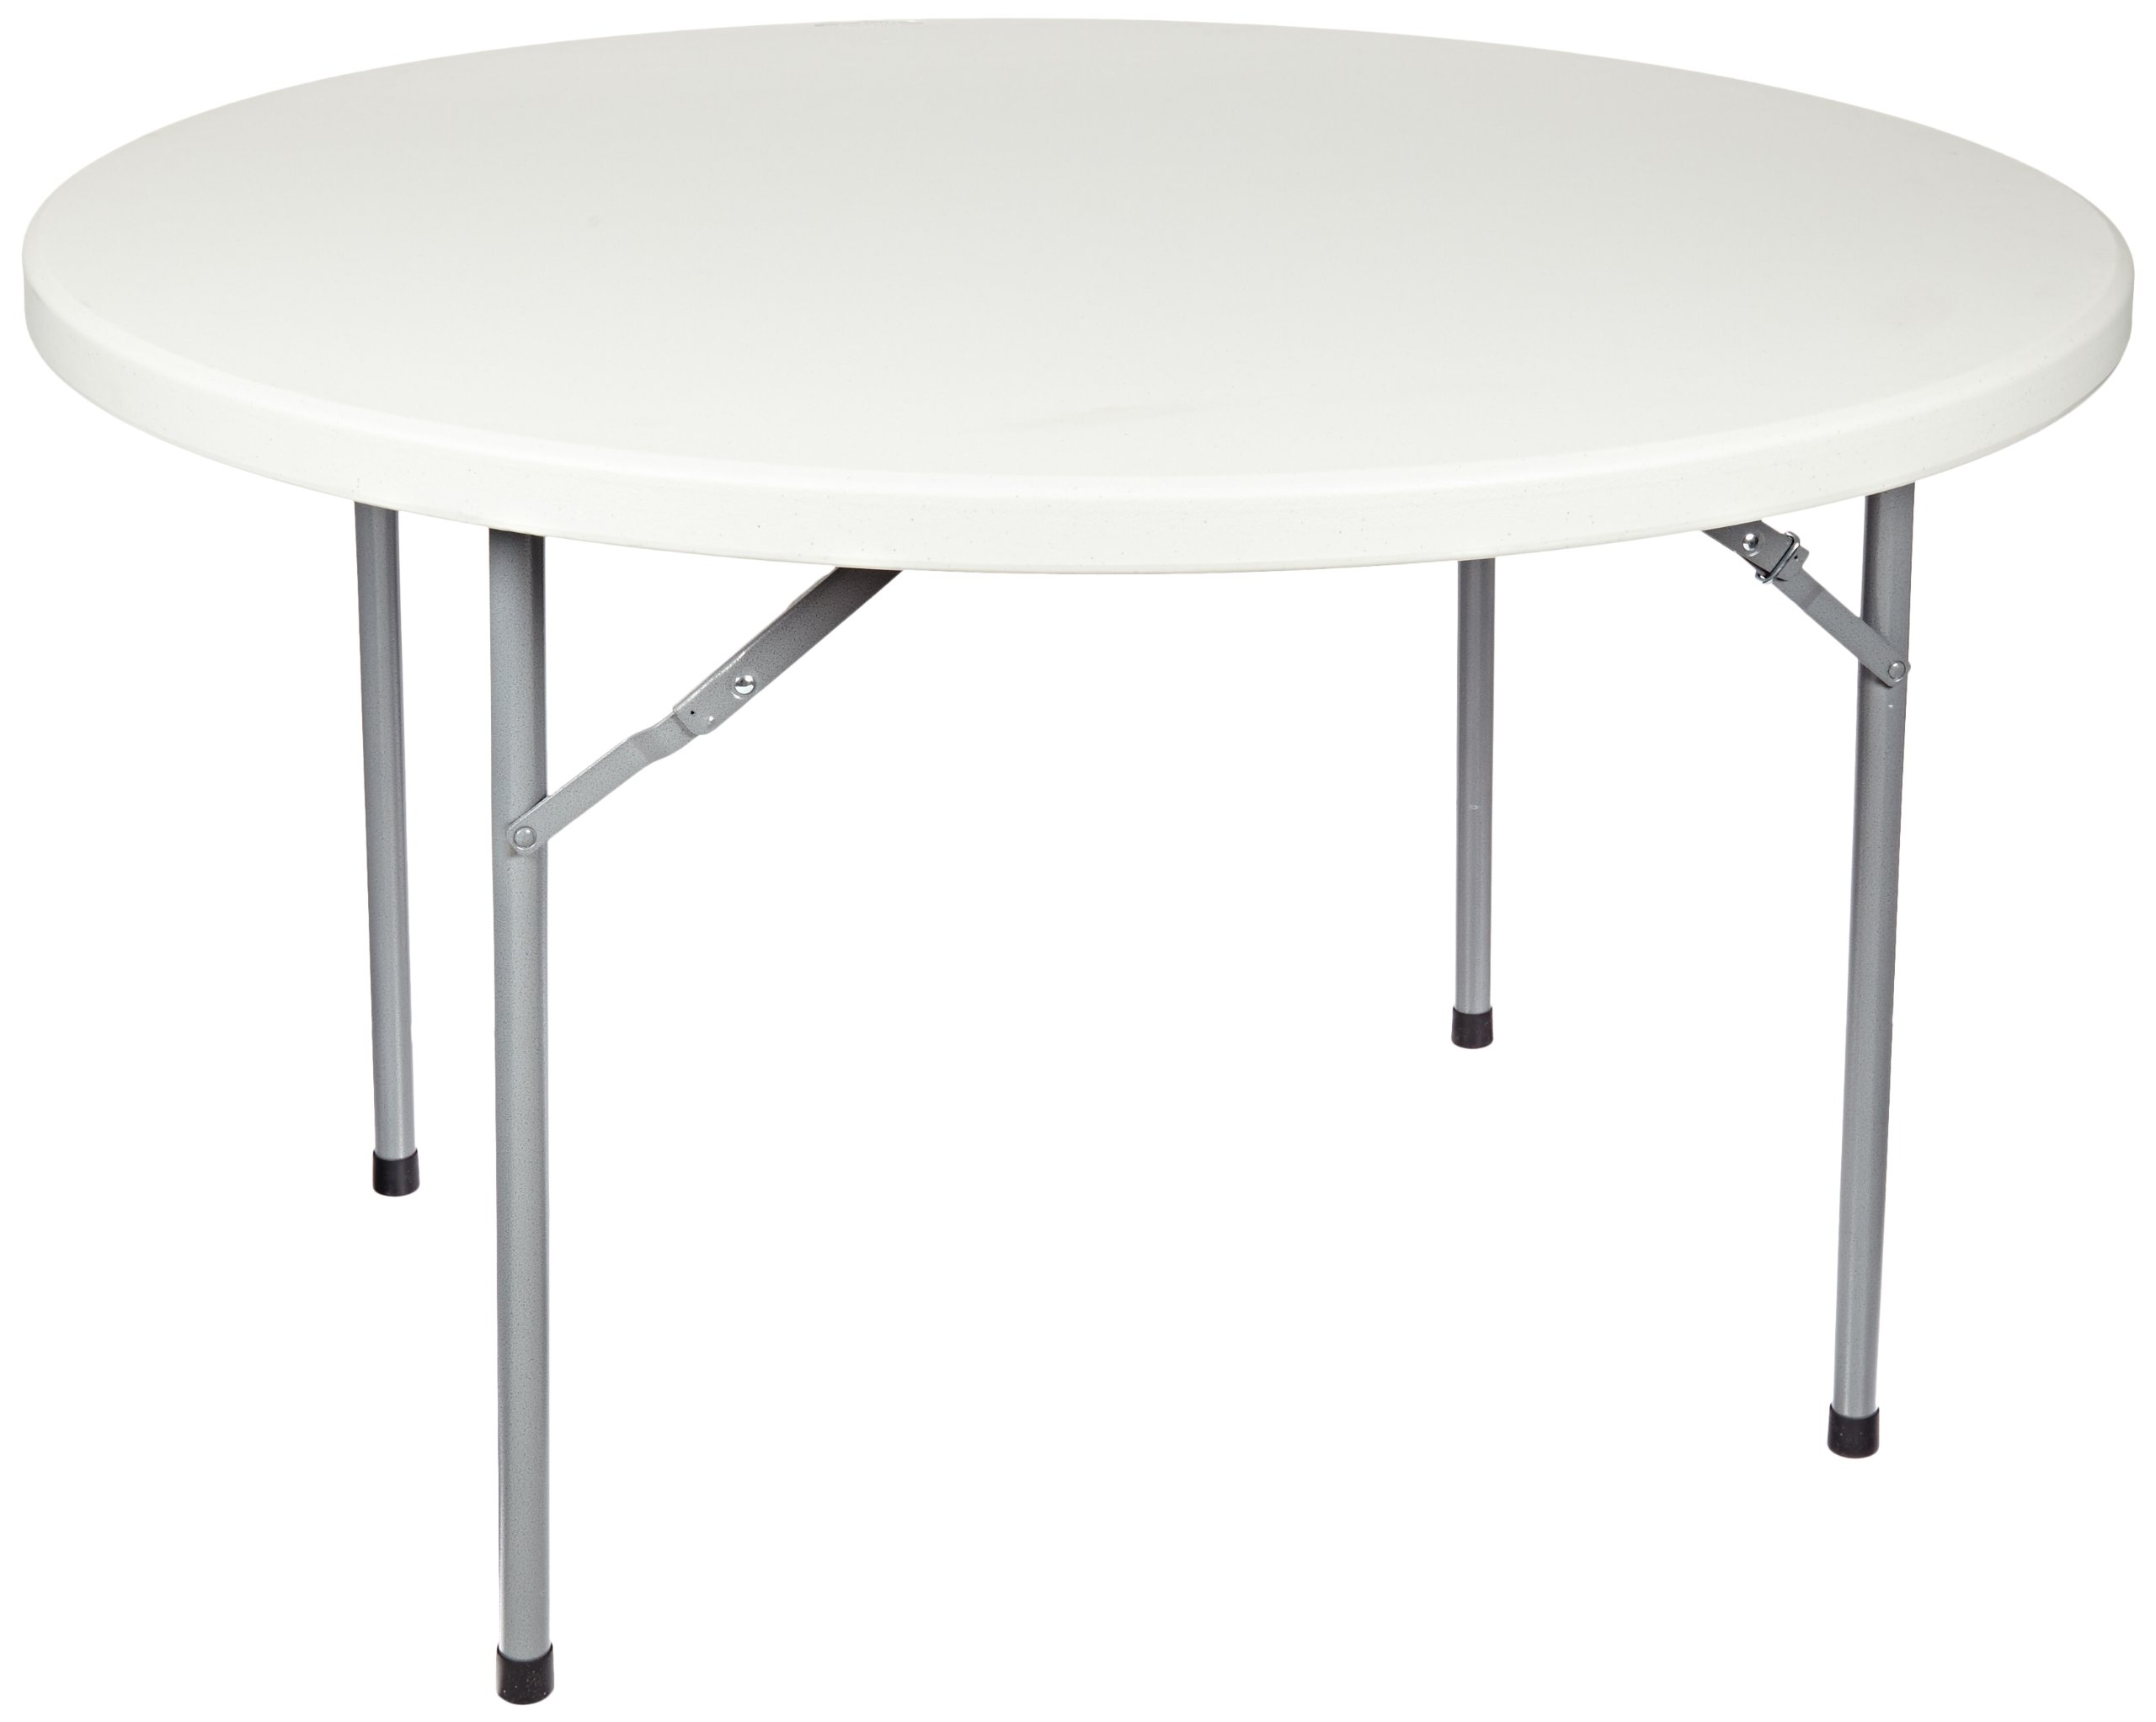 National Public Seating BT-R Series Steel Frame Round Blow Molded Plastic Top Folding Table, 700 lbs Capacity, 48" Diameter x 29-1/2" Height, Speckled Gray/Gray